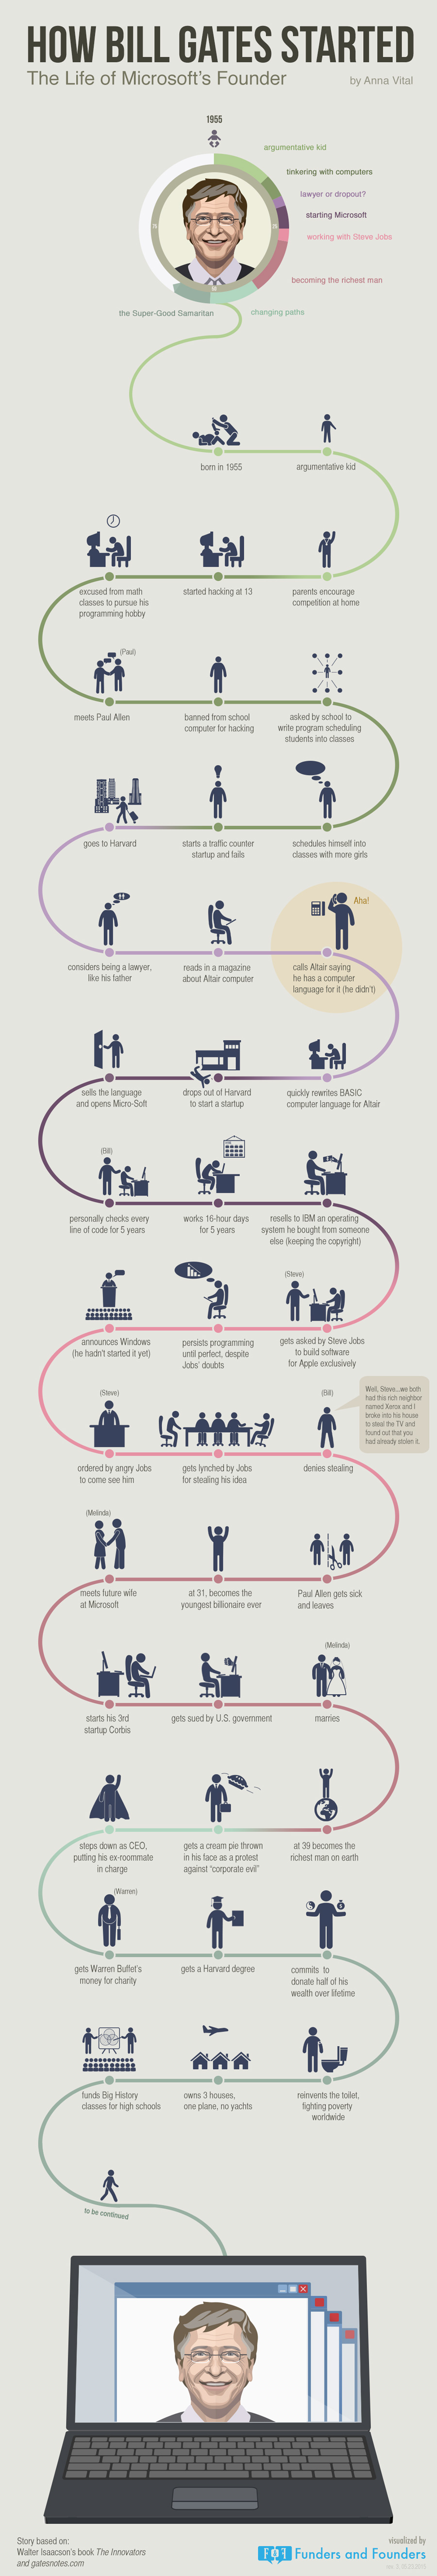 how-bill-gates-started-microsoft-founder-infographic